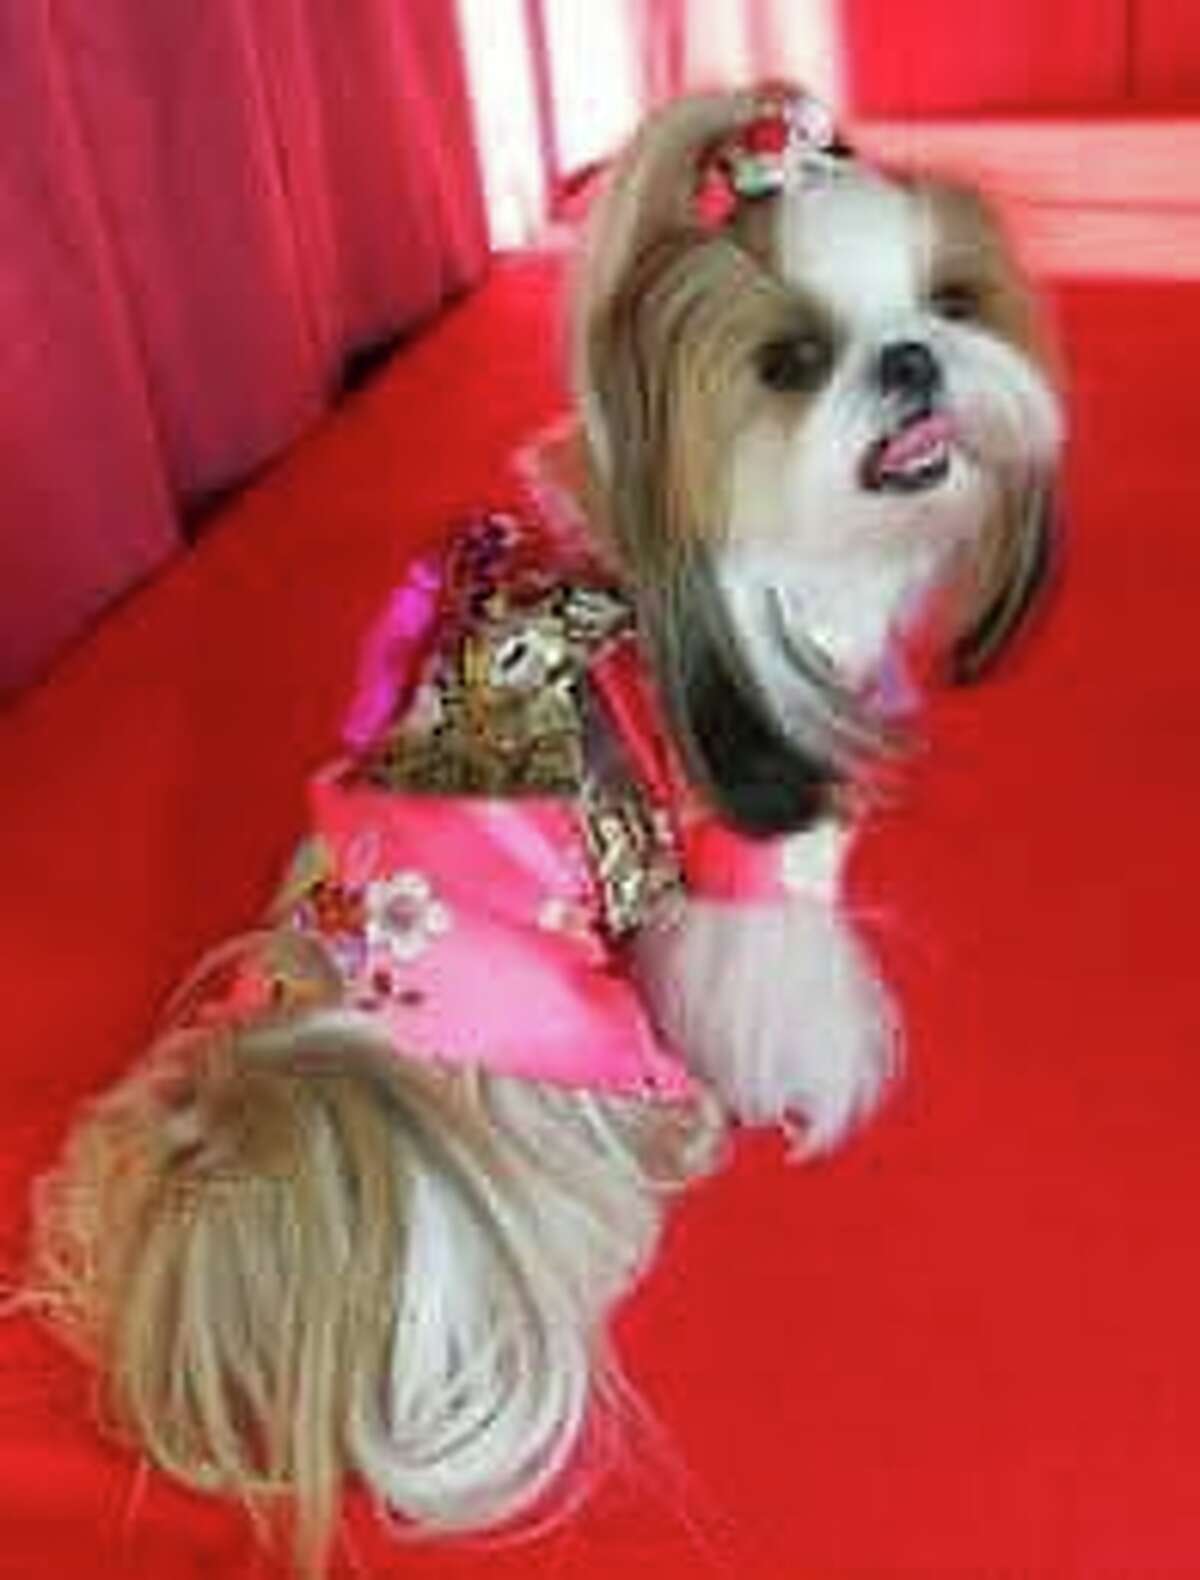 Midland County Pit Stop is dressing up for their largest fundraiser when dogs take the stage for the first K9 Katwalk from 6 to 9 p.m. May 19. Tickets are on sale now. Dogs don't have to be donning diamond crusted bras or wings, but it's okay if they do. Limited space is available to enter your dog-friendly dog.